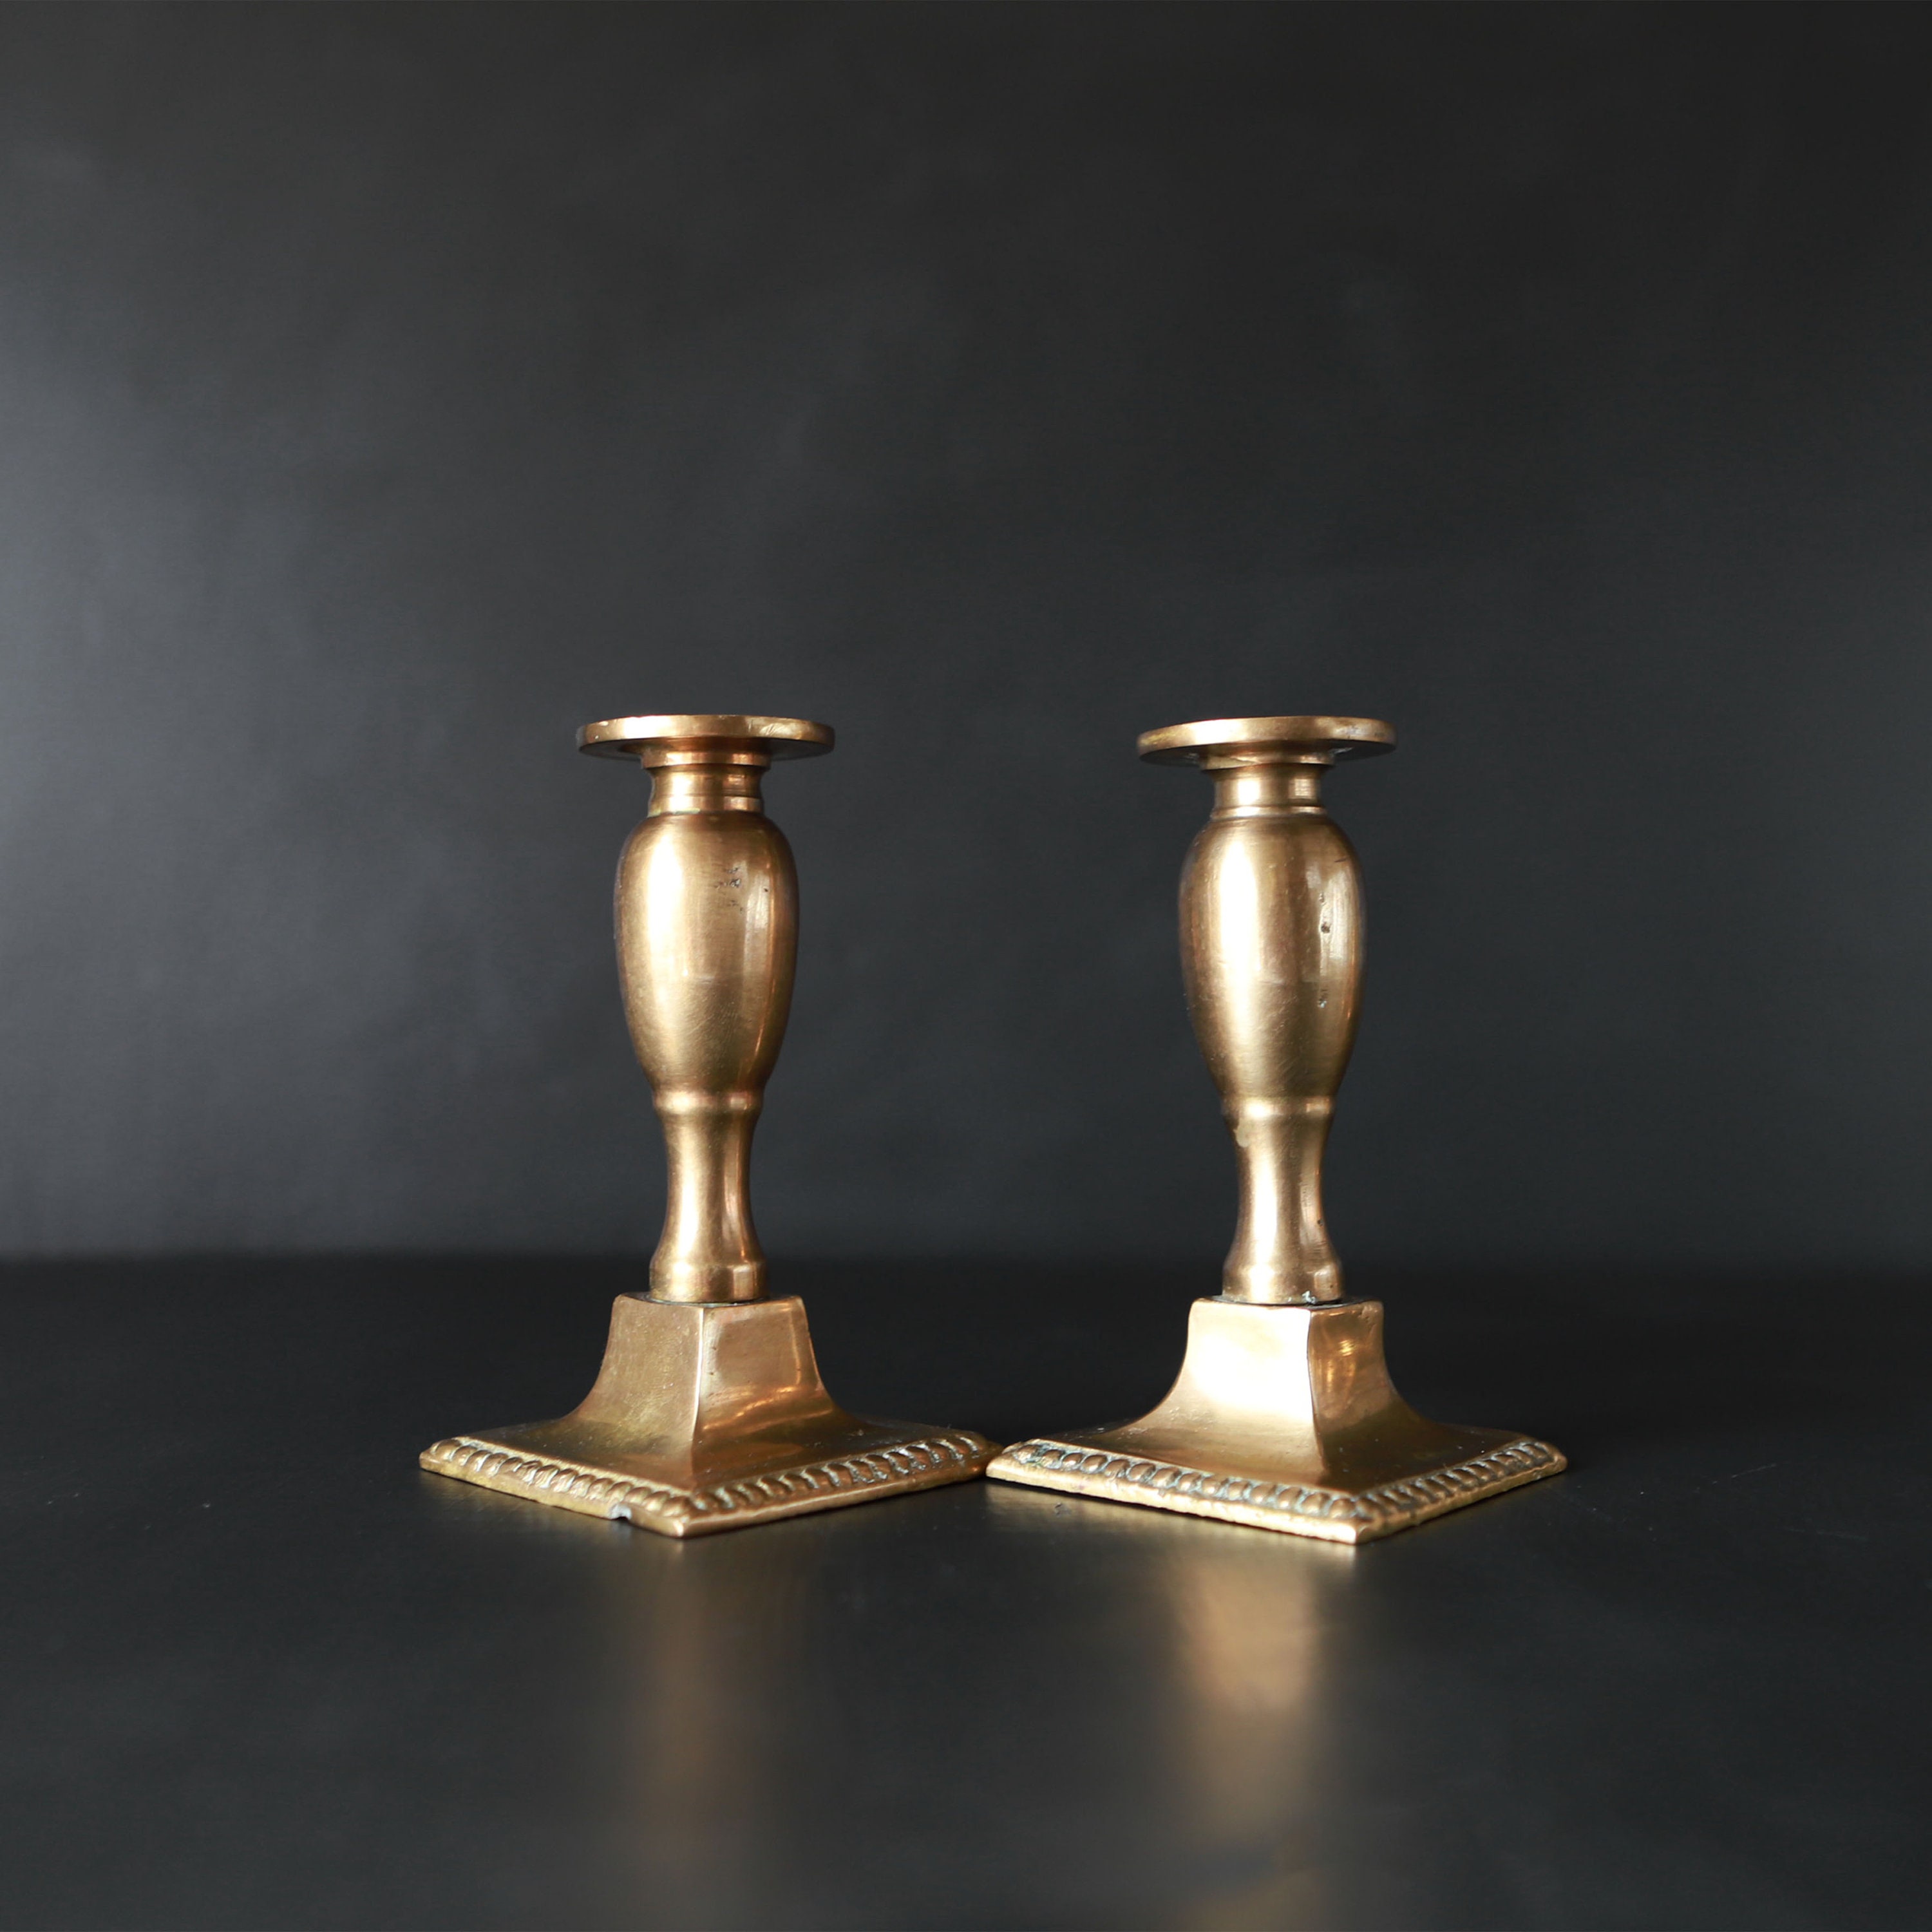 Vintage Brass Taper Candle Holder Square Footed Base Set of 2 -  Norway